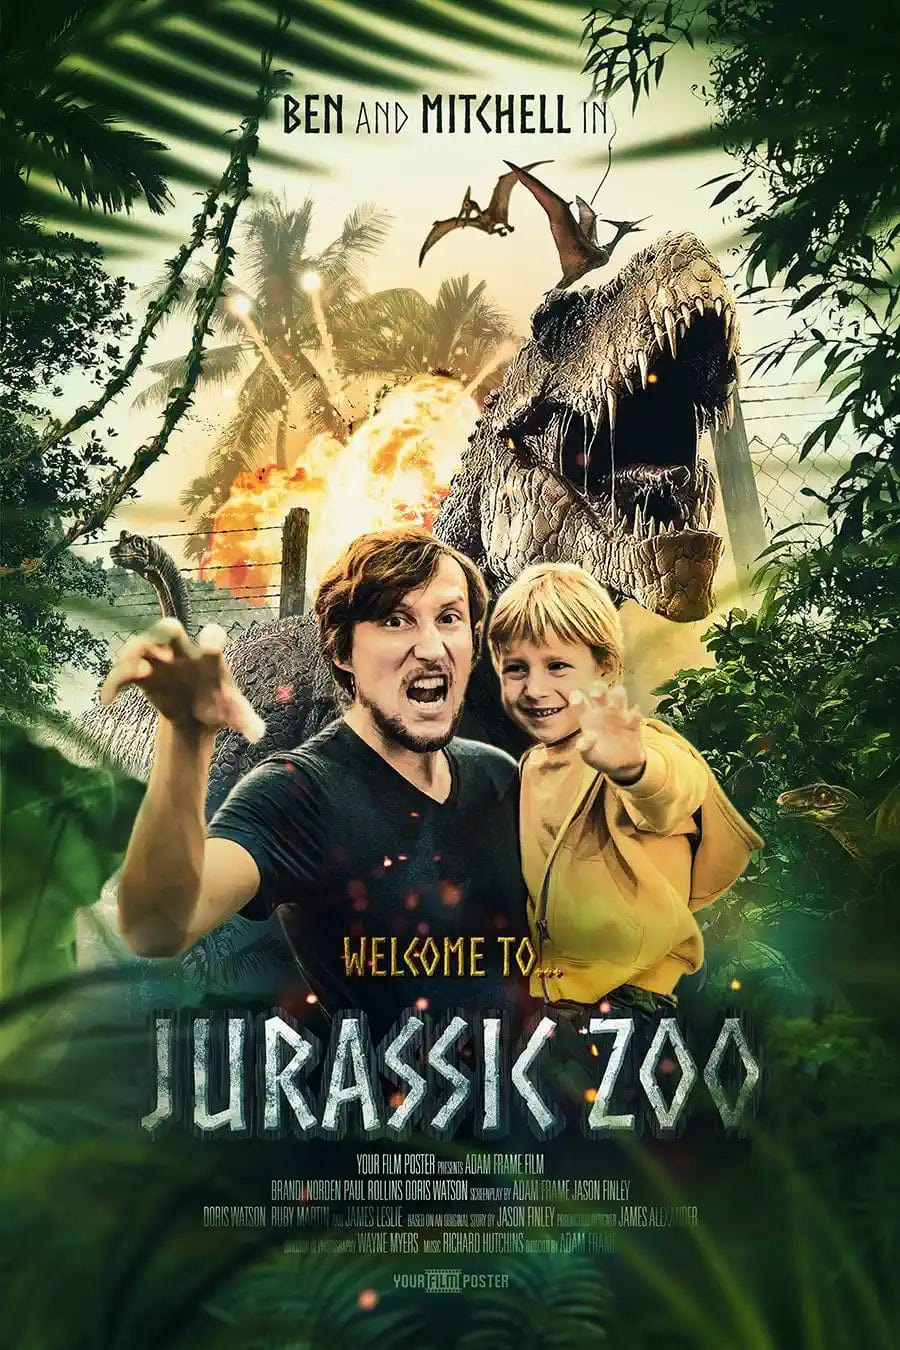 Your personalized movie poster inspired on Jurassic Park. A photo of a dad and his son in a jungle environment with a T-rex behind them!